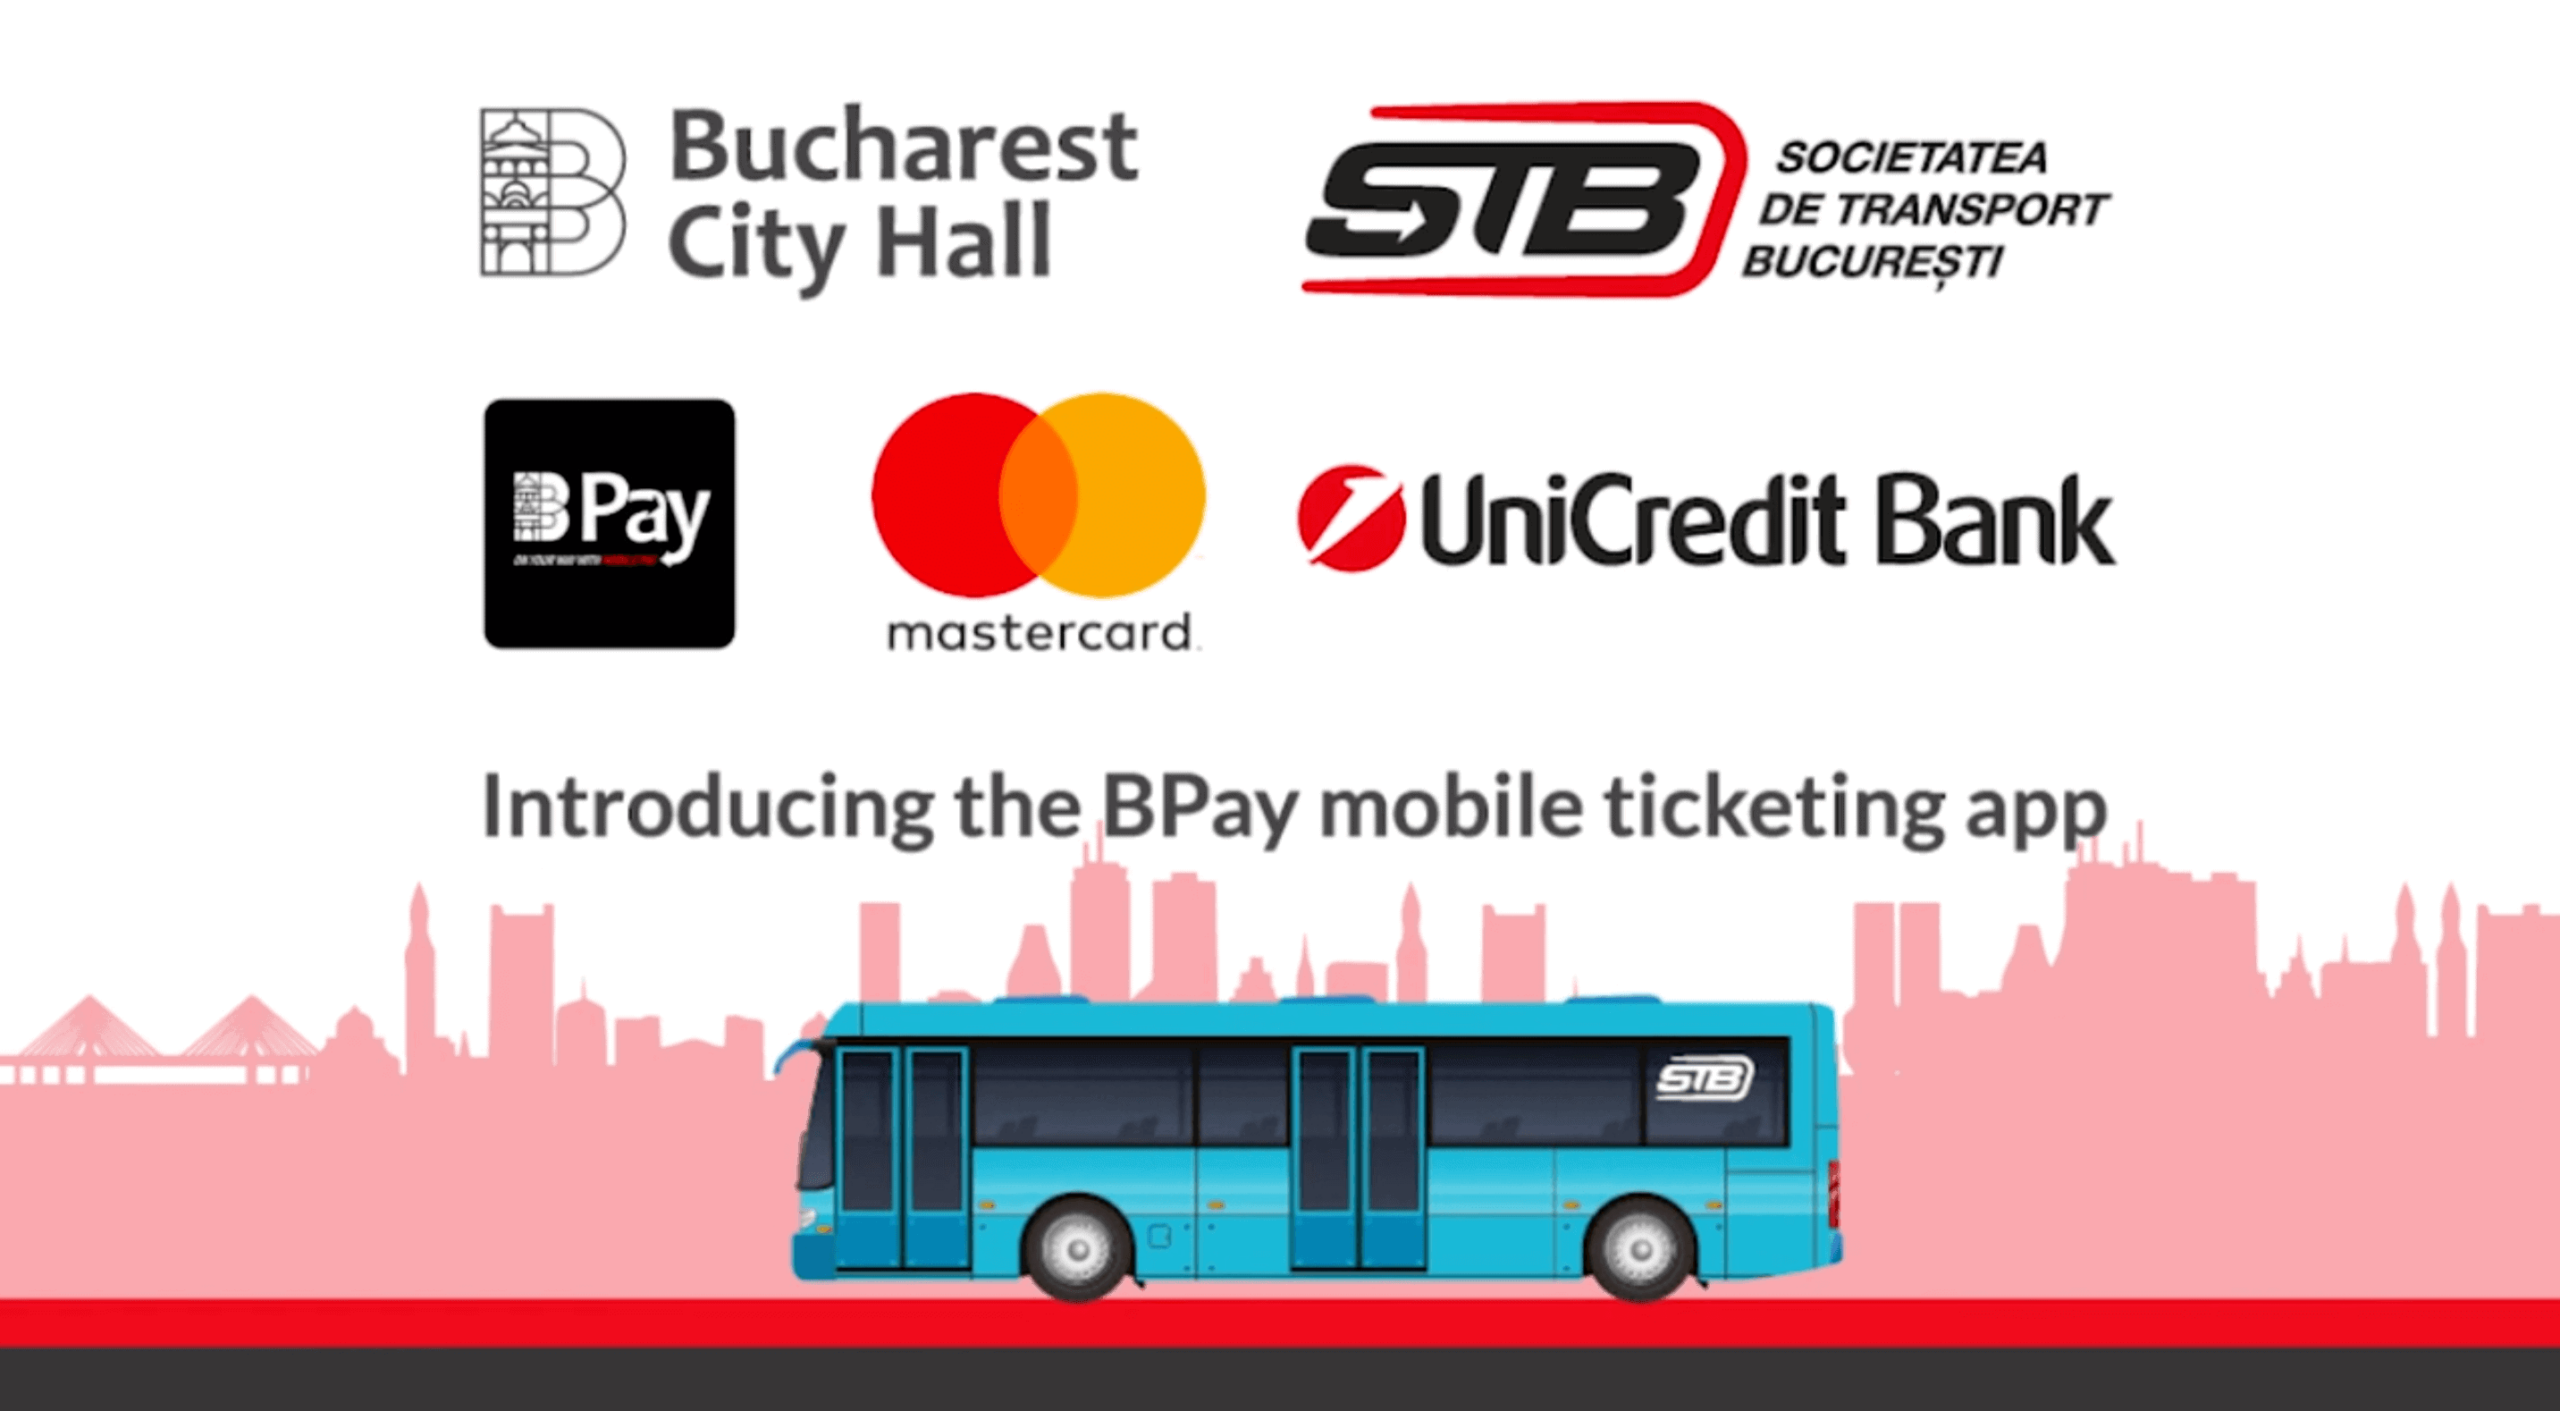 Introducing the BPay Mobile Ticketing App live in Bucharest.